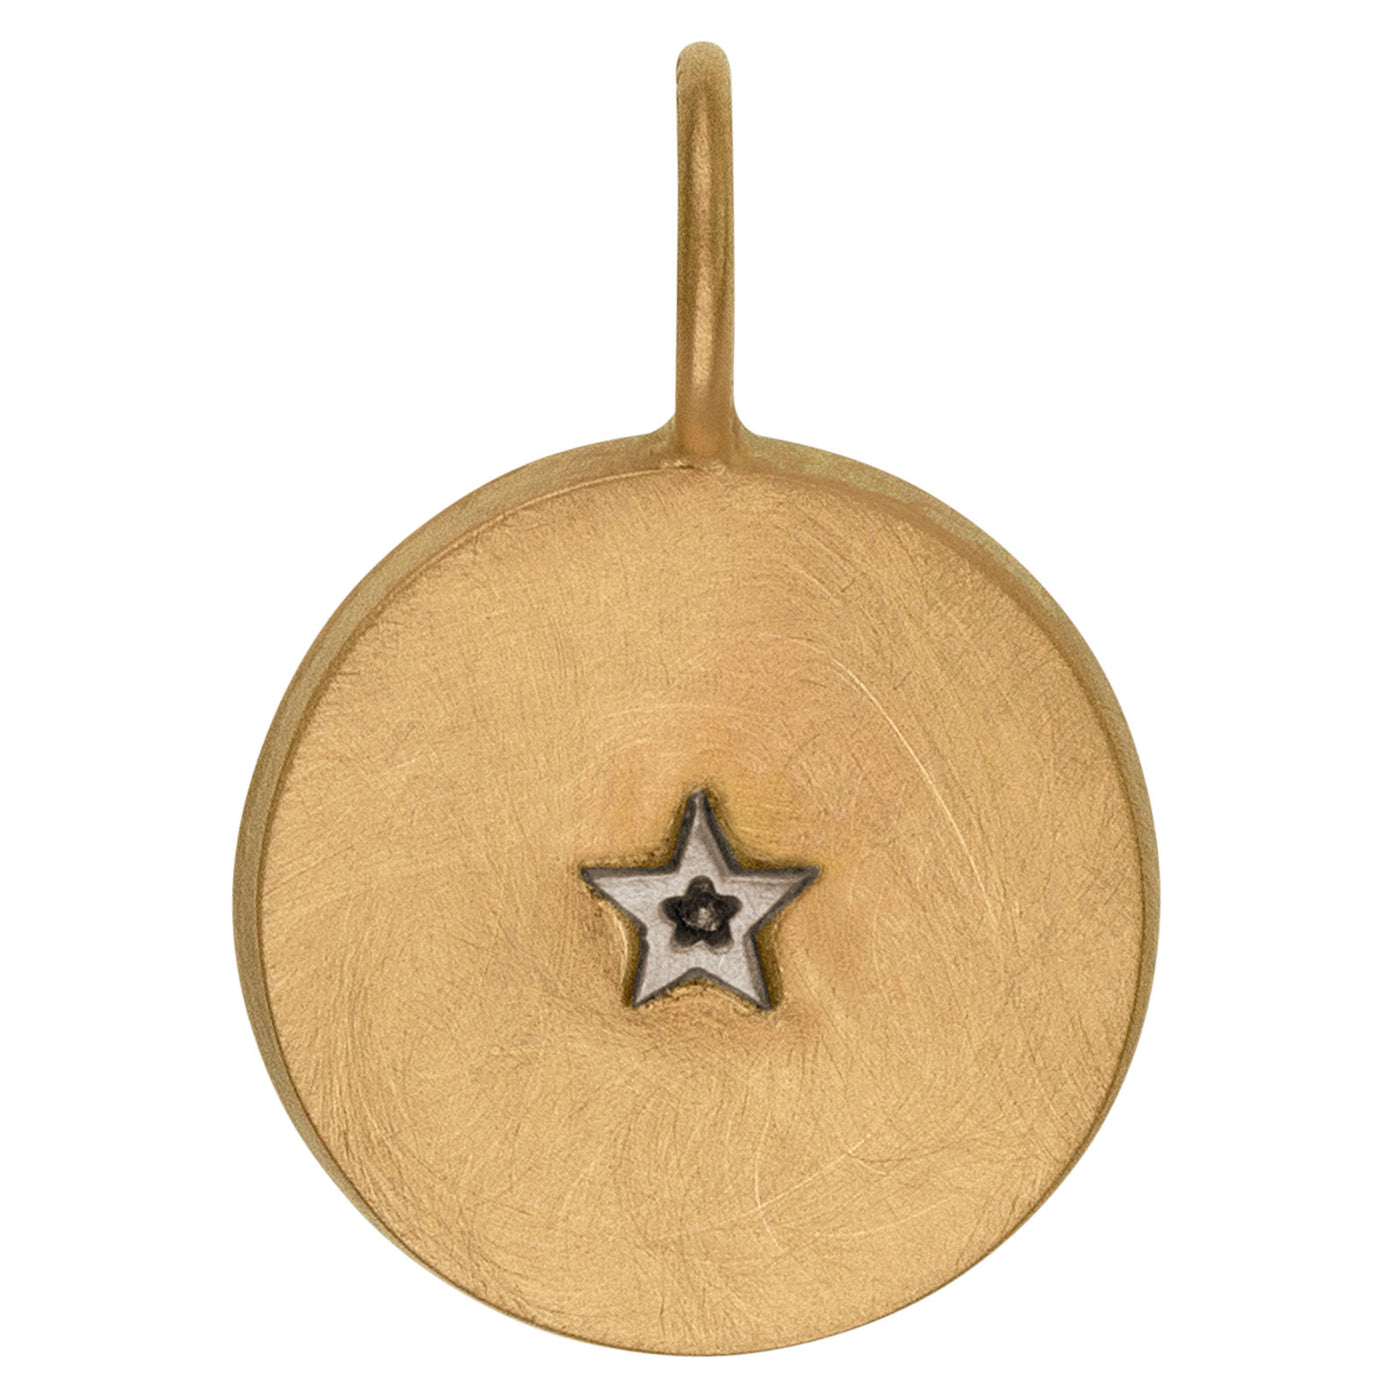 Compass Framed Round Charm